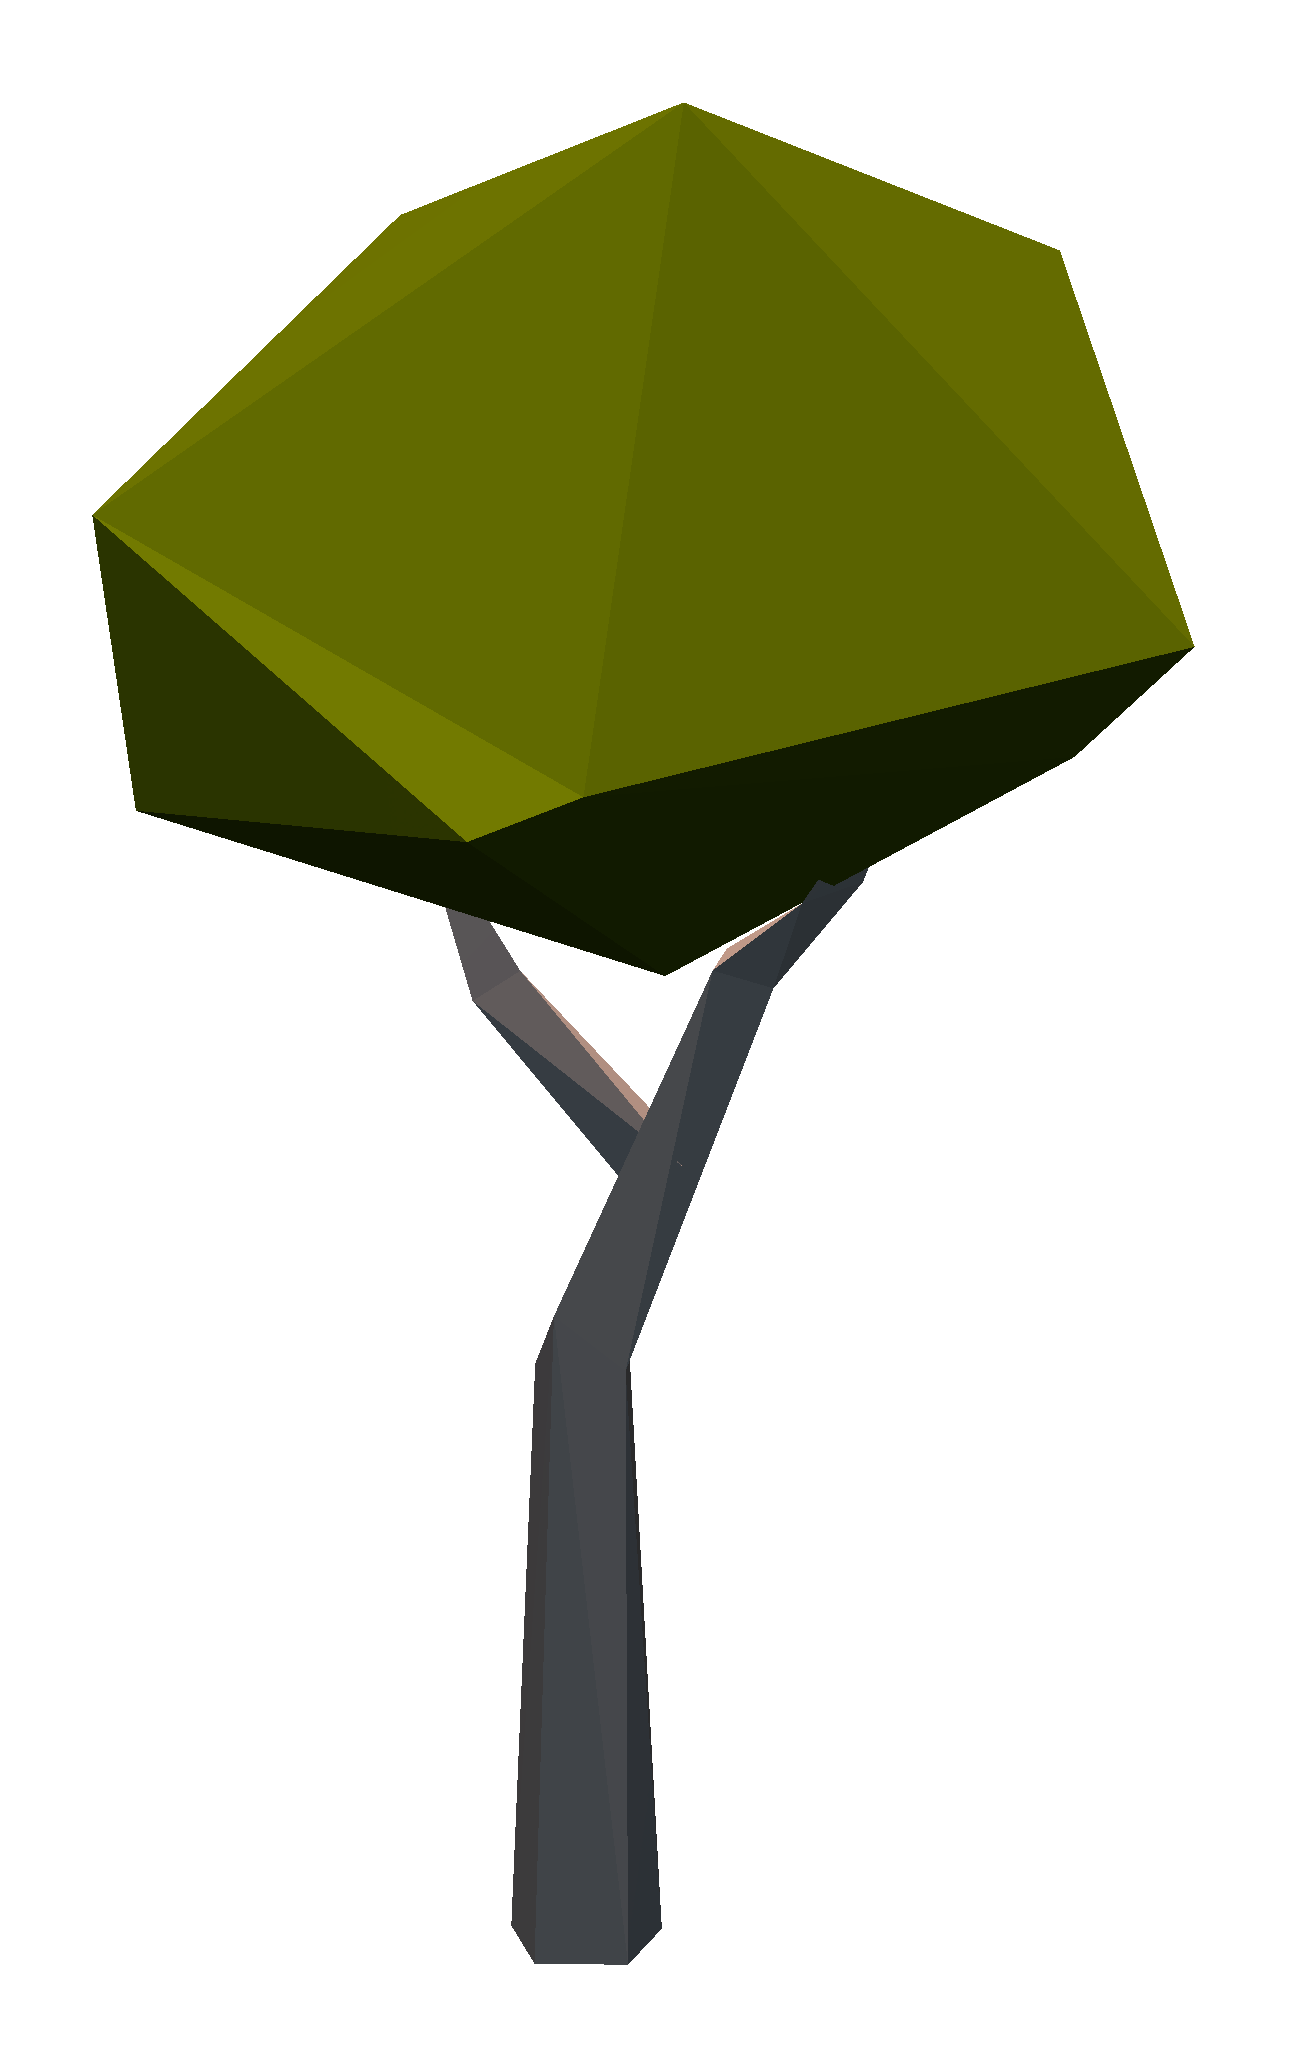 _images/tree.png